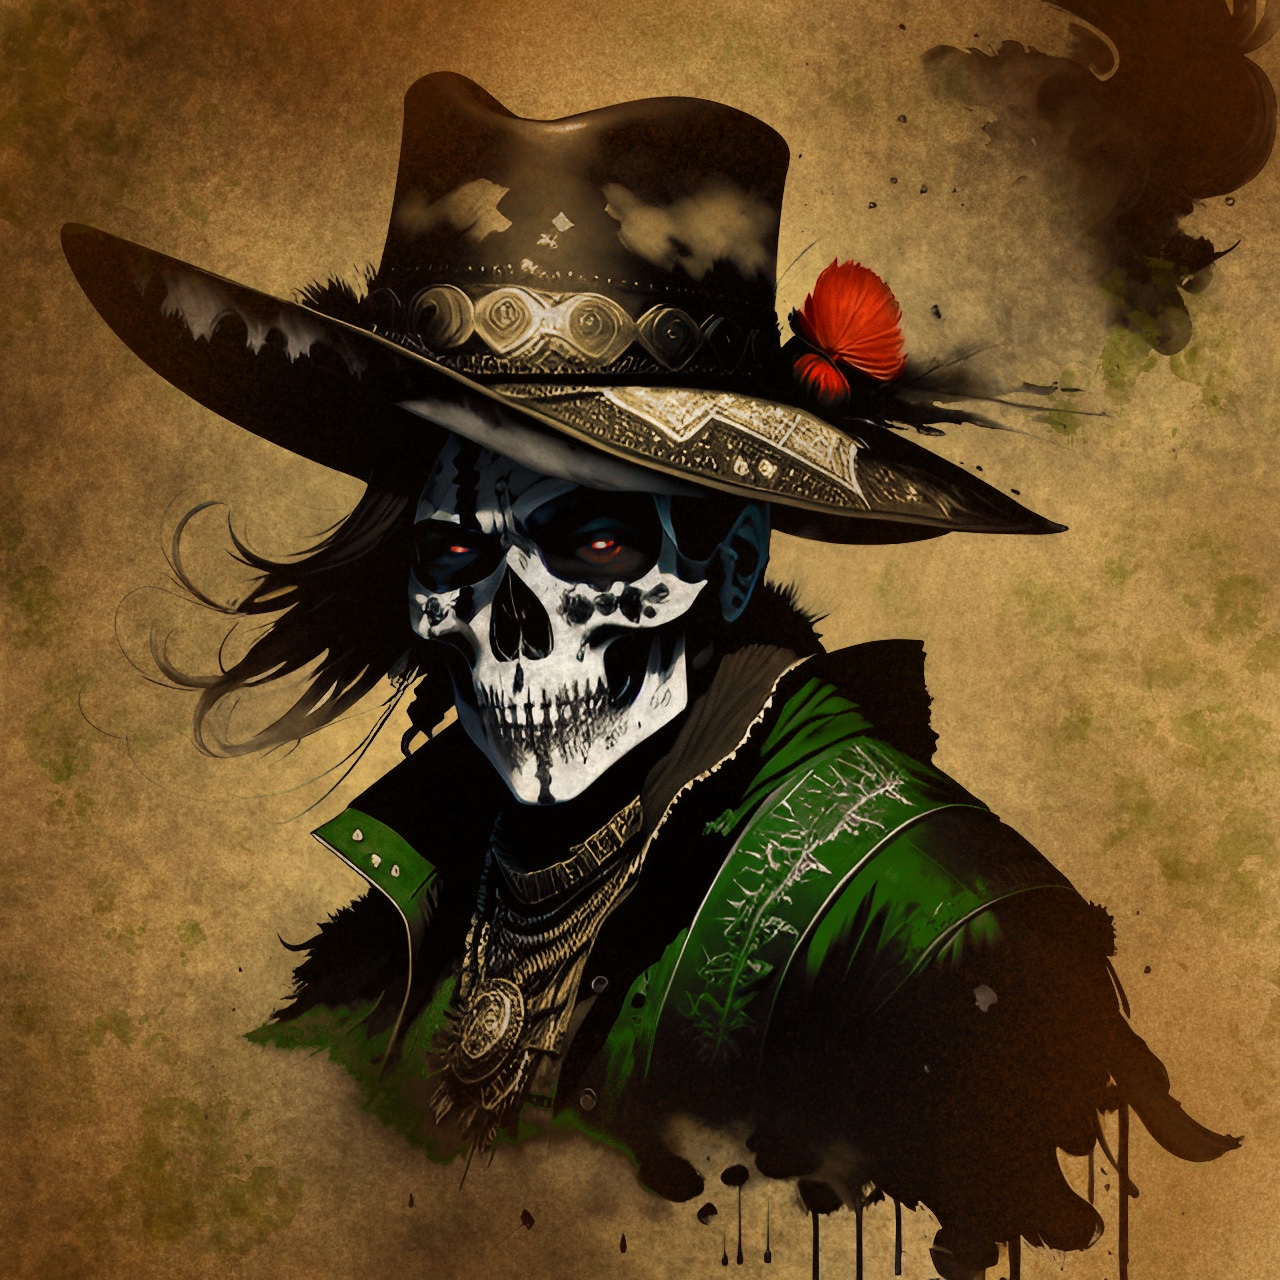 The Undead Outlaws